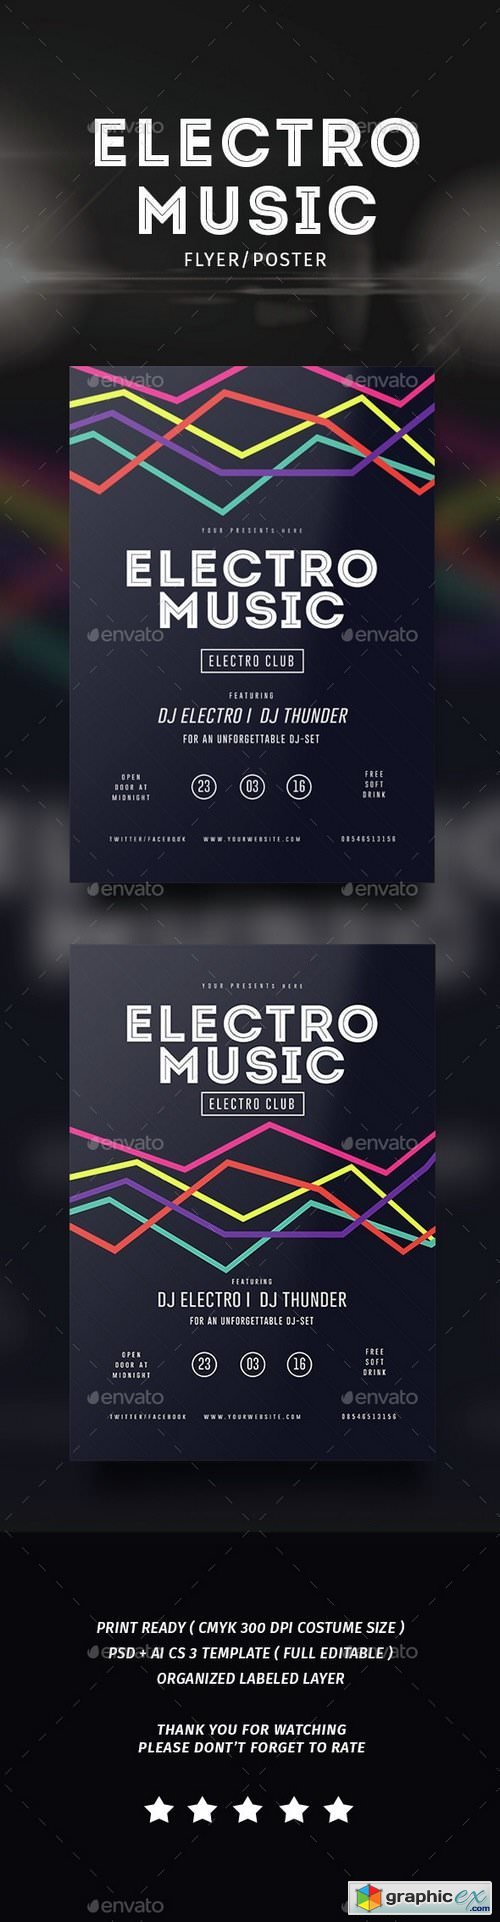 Electro Musik Flyer & Poster